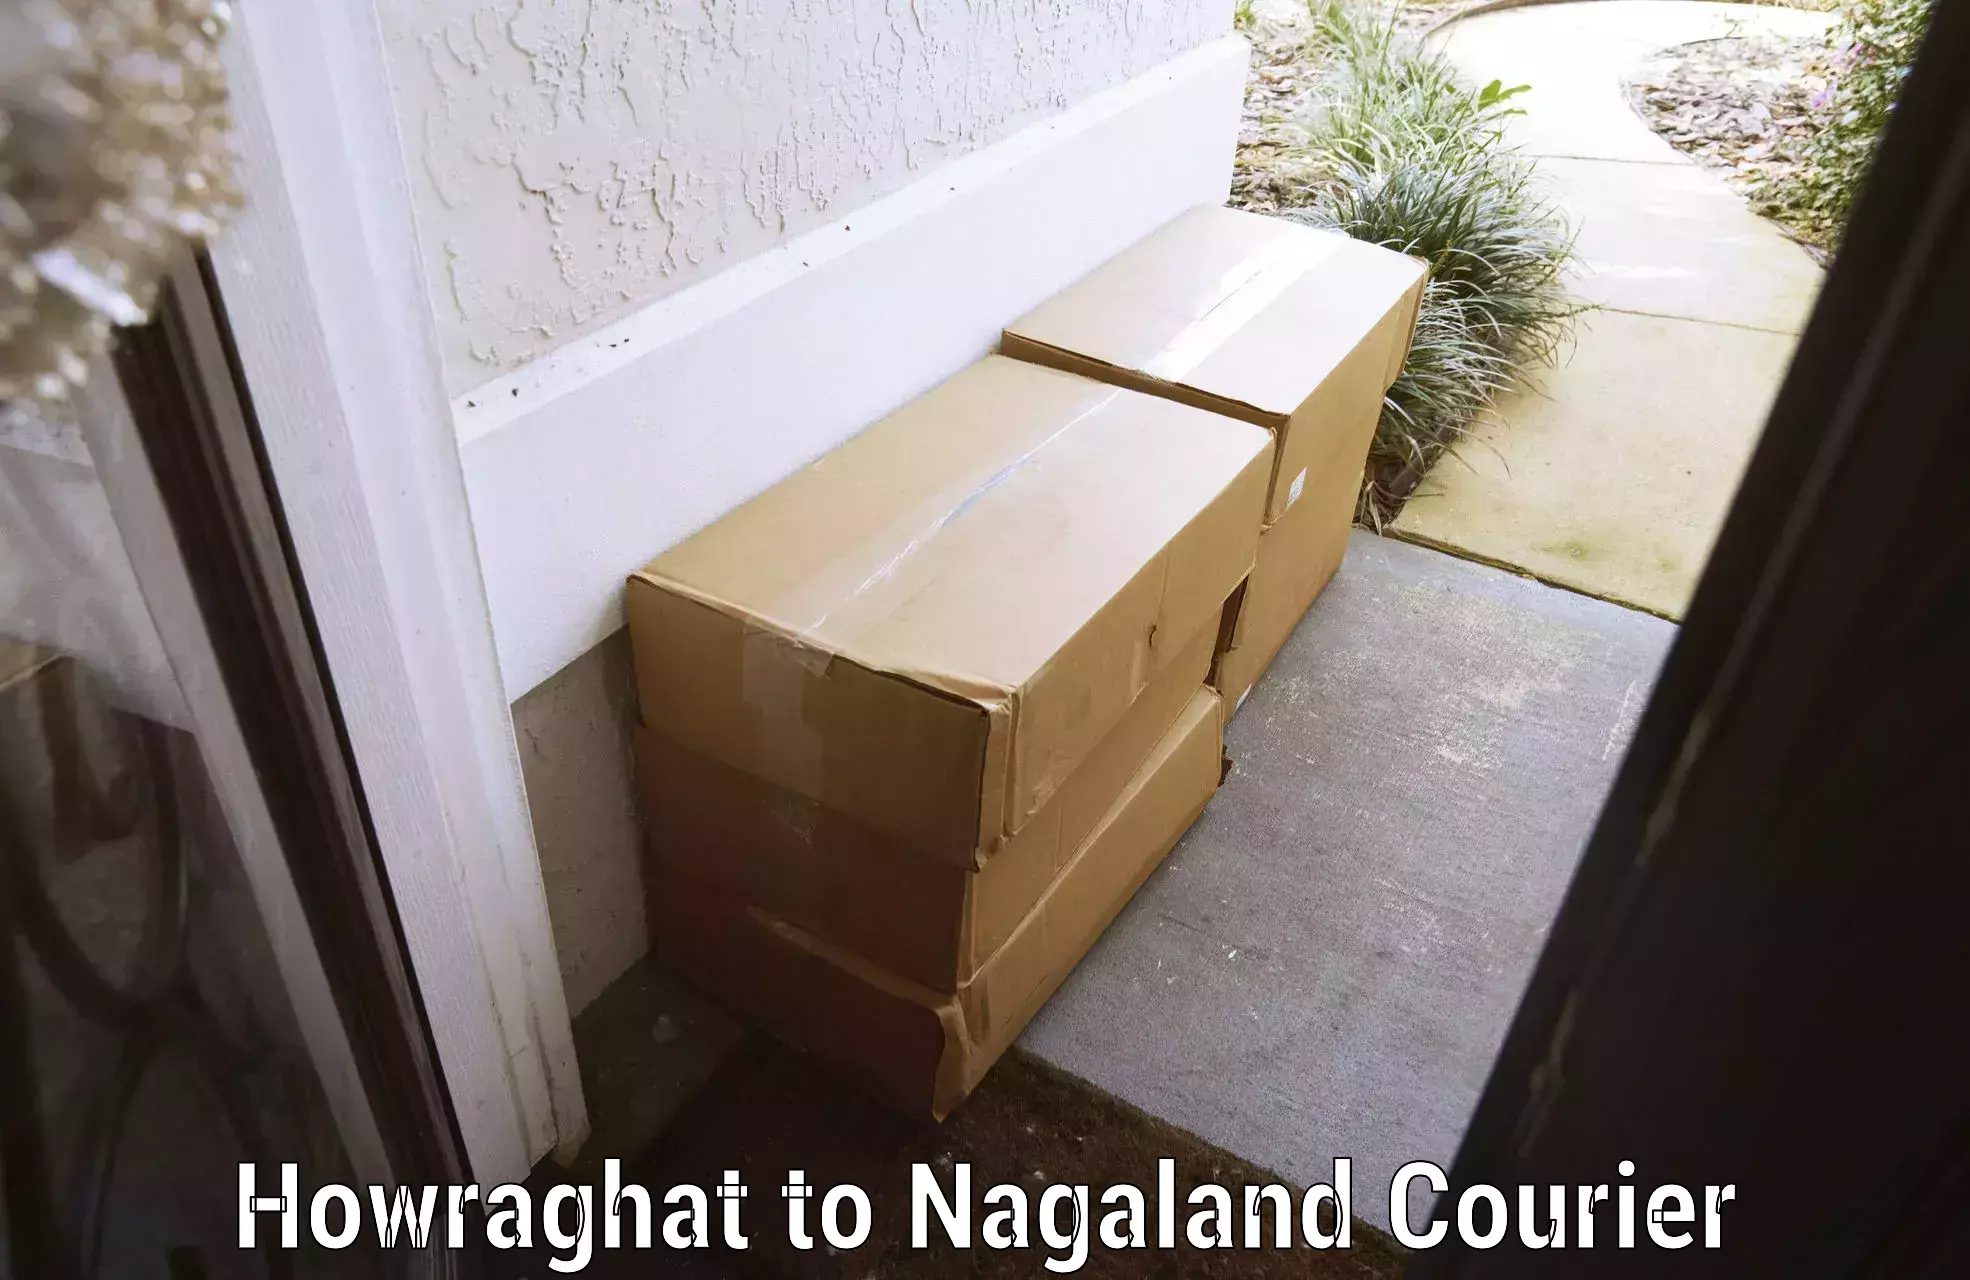 Baggage transport cost Howraghat to Nagaland